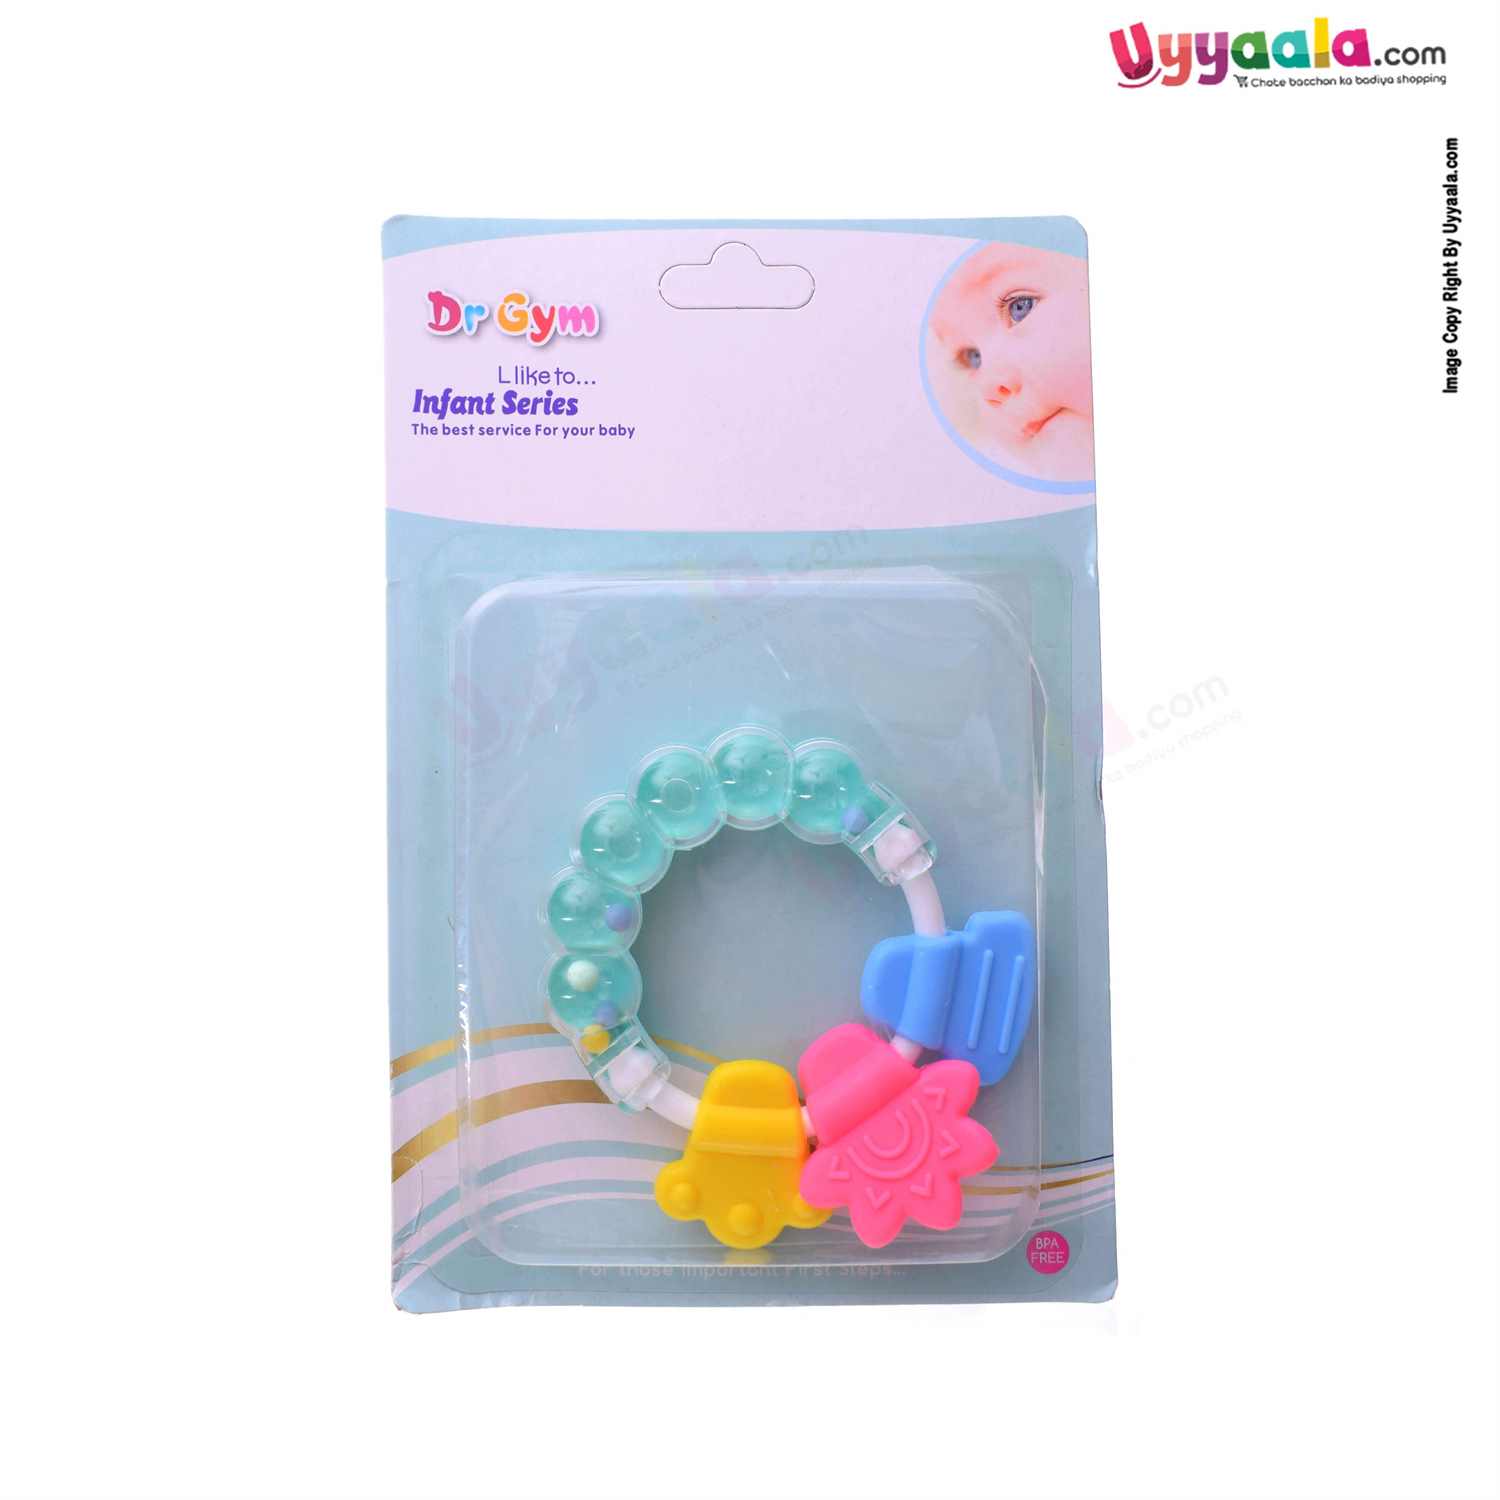 DR.GYM Silicone Teether With Doodle Ring 6+m Age - Multi Color